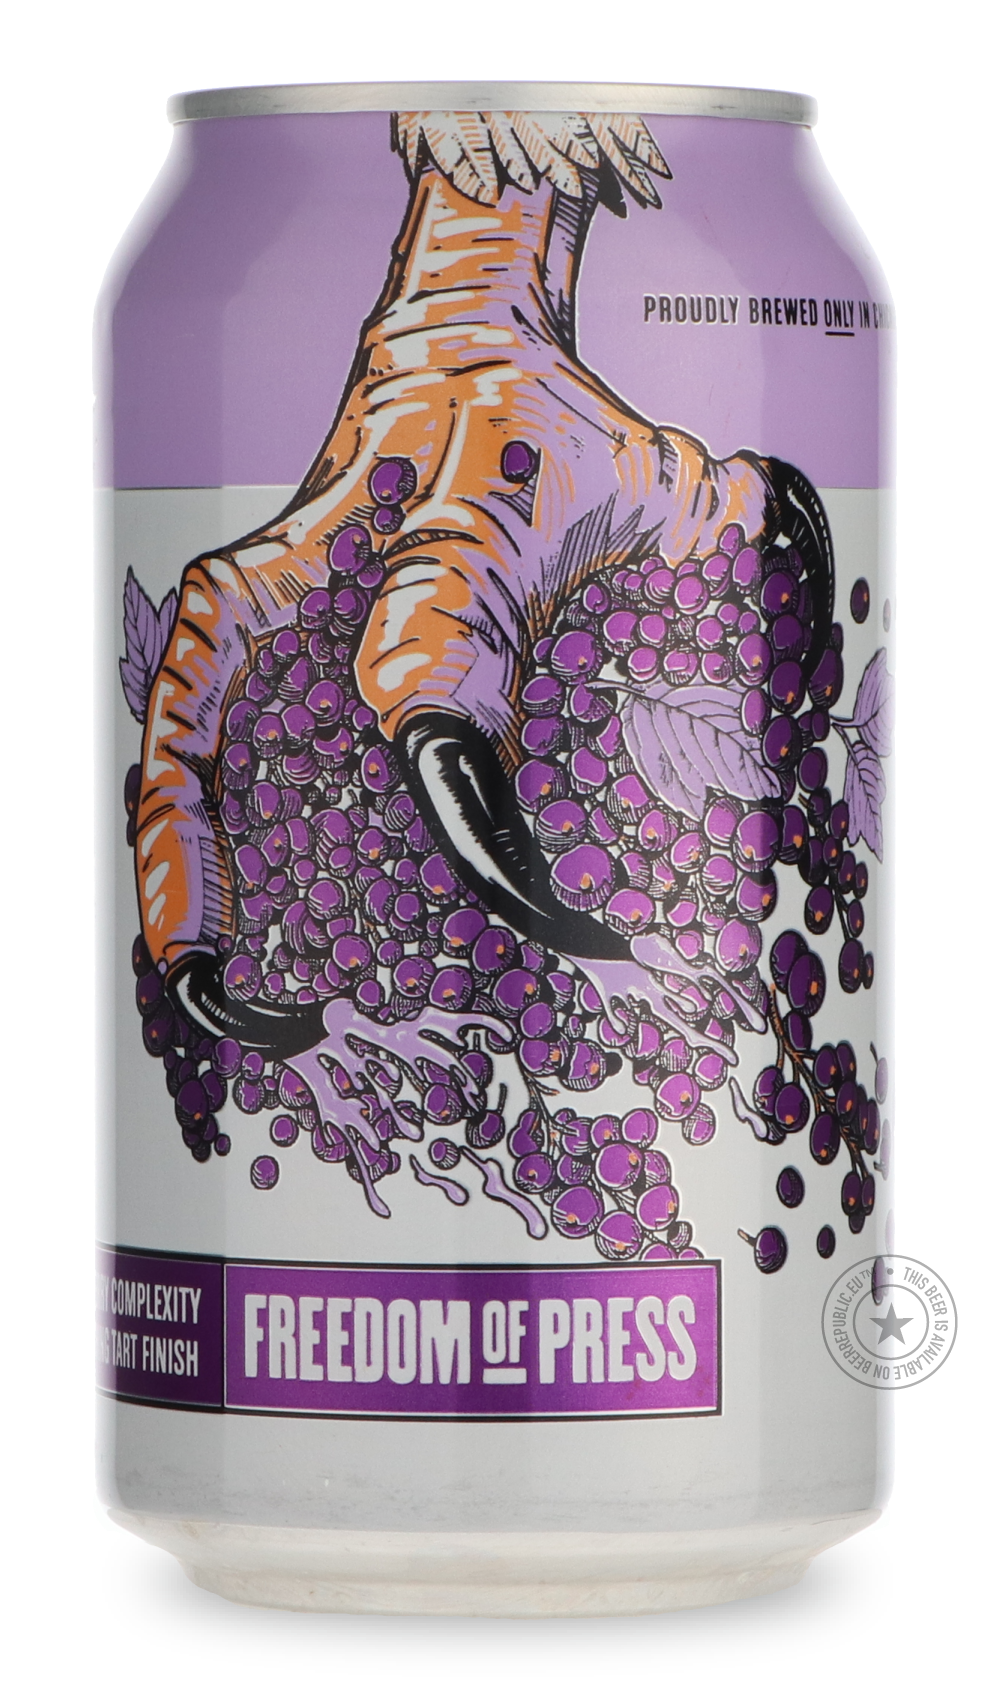 -Revolution- Freedom of Press-Sour / Wild & Fruity- Only @ Beer Republic - The best online beer store for American & Canadian craft beer - Buy beer online from the USA and Canada - Bier online kopen - Amerikaans bier kopen - Craft beer store - Craft beer kopen - Amerikanisch bier kaufen - Bier online kaufen - Acheter biere online - IPA - Stout - Porter - New England IPA - Hazy IPA - Imperial Stout - Barrel Aged - Barrel Aged Imperial Stout - Brown - Dark beer - Blond - Blonde - Pilsner - Lager - Wheat - Wei